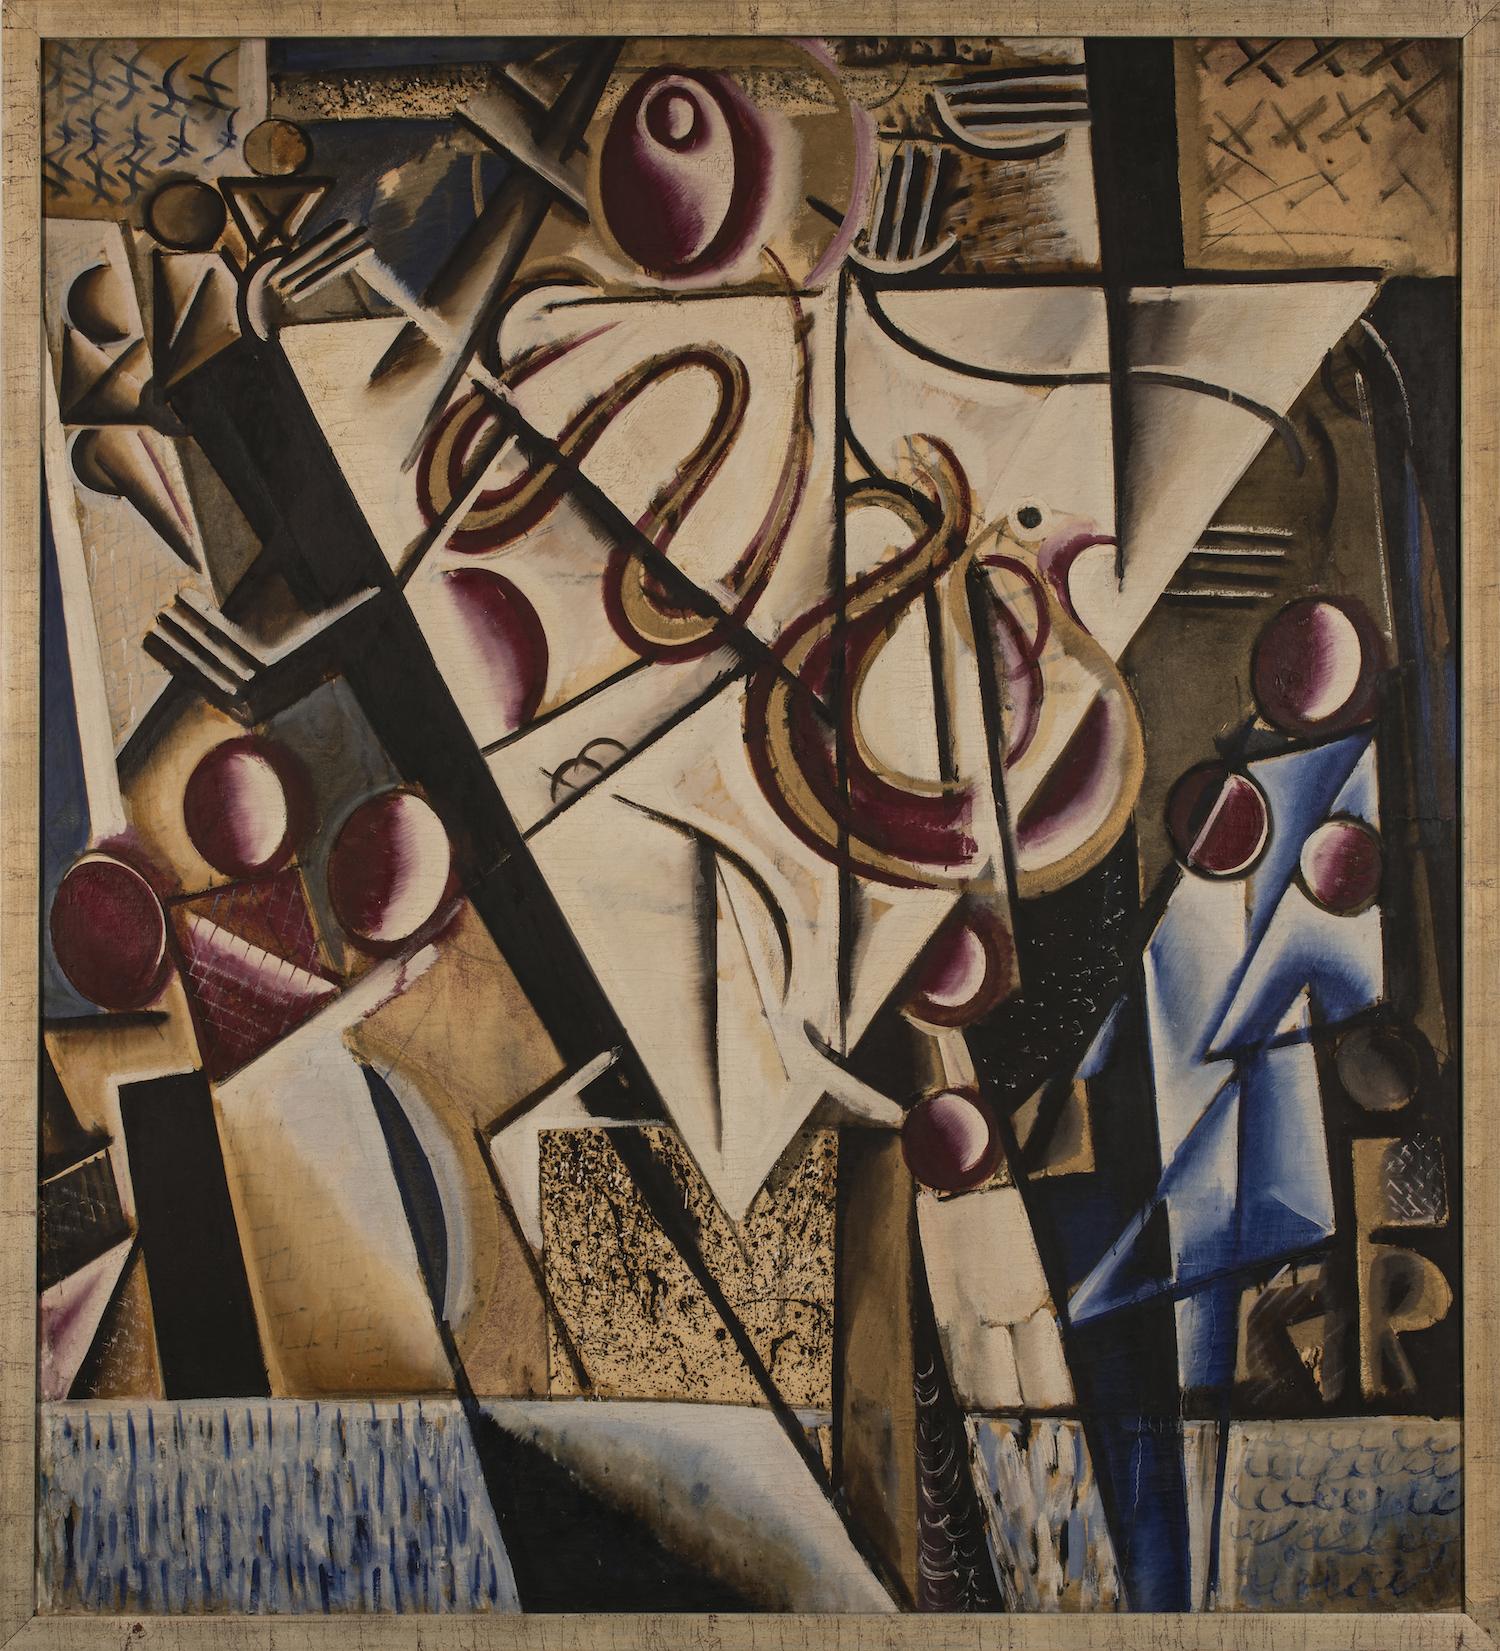 Béla Uitz: Icon Analysis (Abstract Composition with Female Figure), 1921/1922. Oil on canvas, 157×143 cm. Private Collection (Belgium)